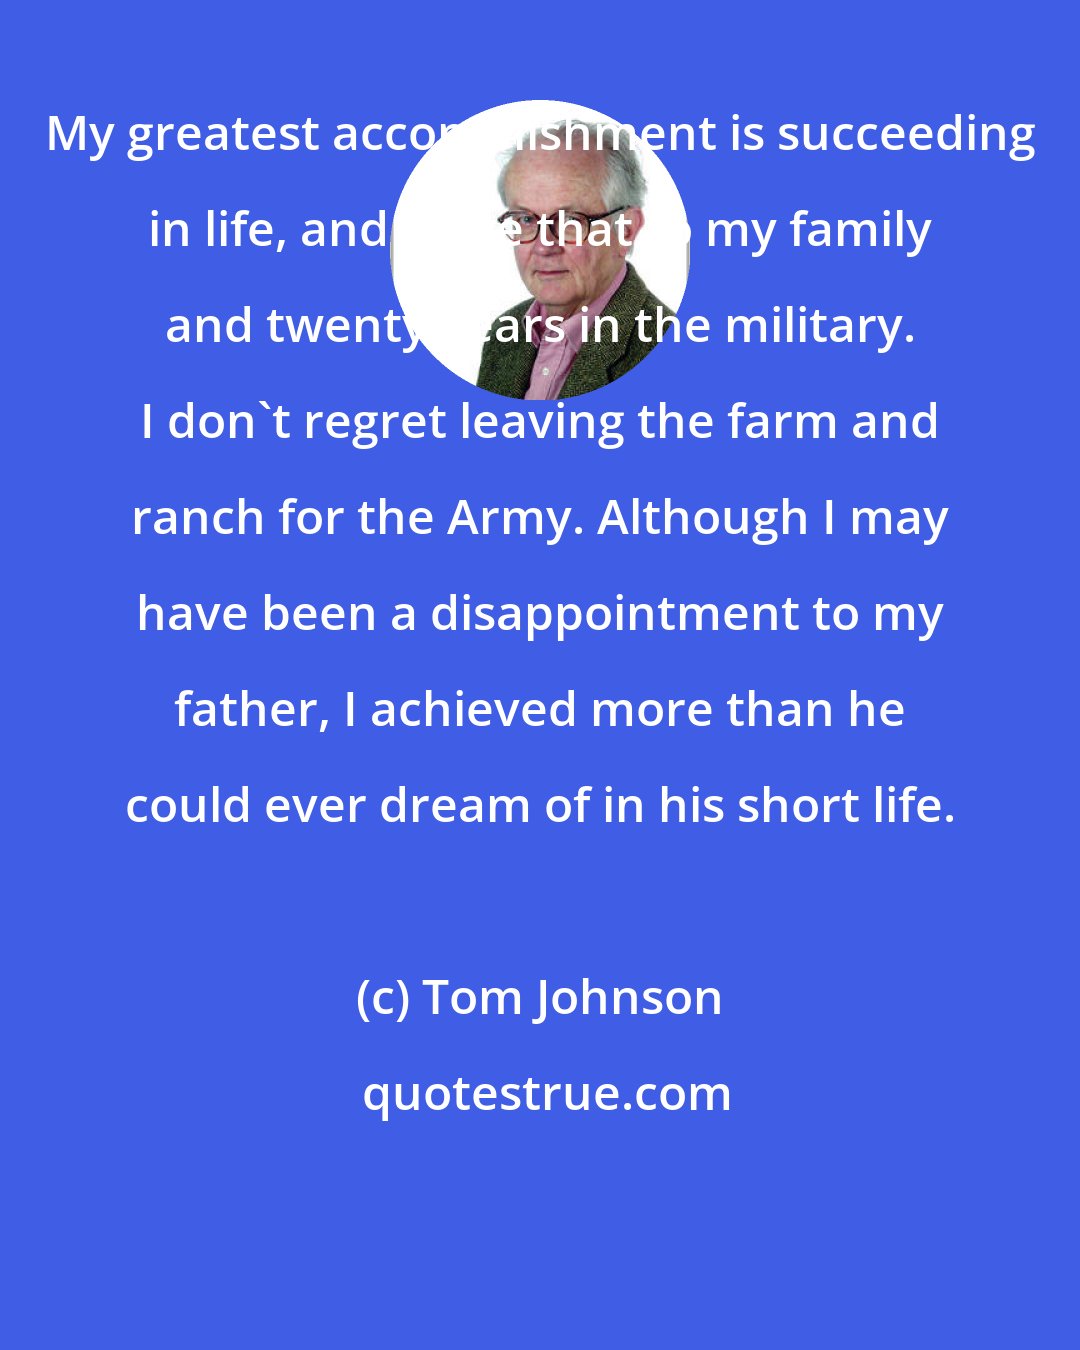 Tom Johnson: My greatest accomplishment is succeeding in life, and I owe that to my family and twenty years in the military. I don't regret leaving the farm and ranch for the Army. Although I may have been a disappointment to my father, I achieved more than he could ever dream of in his short life.